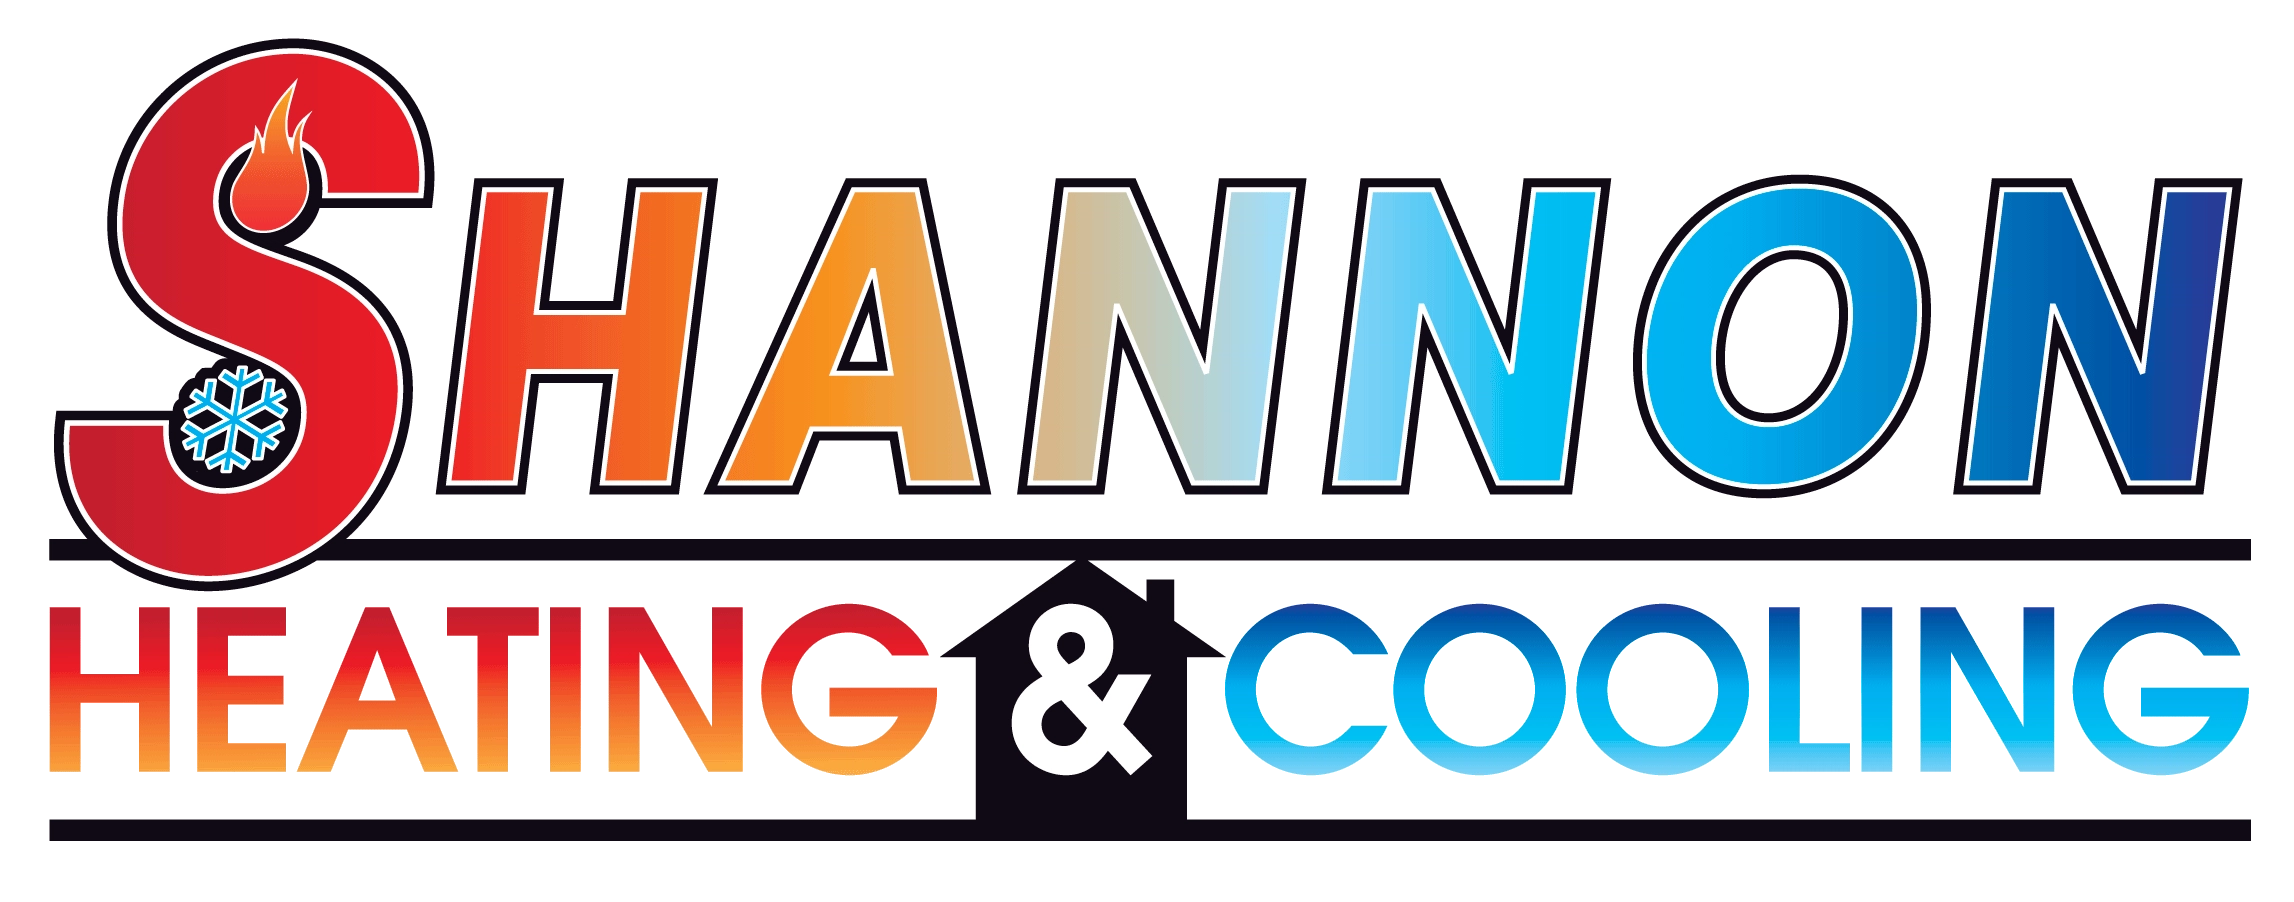 Shannon Heating & Cooling Logo